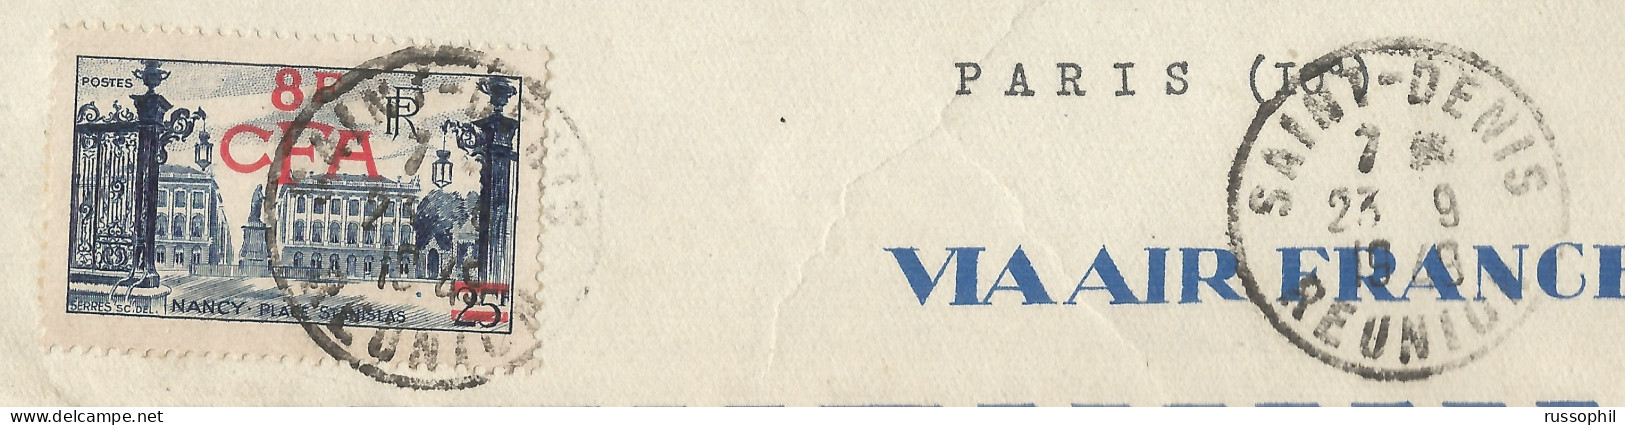 REUNION - OVERCHARGED 8 F CFA STAMP FRANKING COMMERCIAL AIR COVER FROM SAINT DENIS TO MAINLAND FRANCE - 1949 - Storia Postale